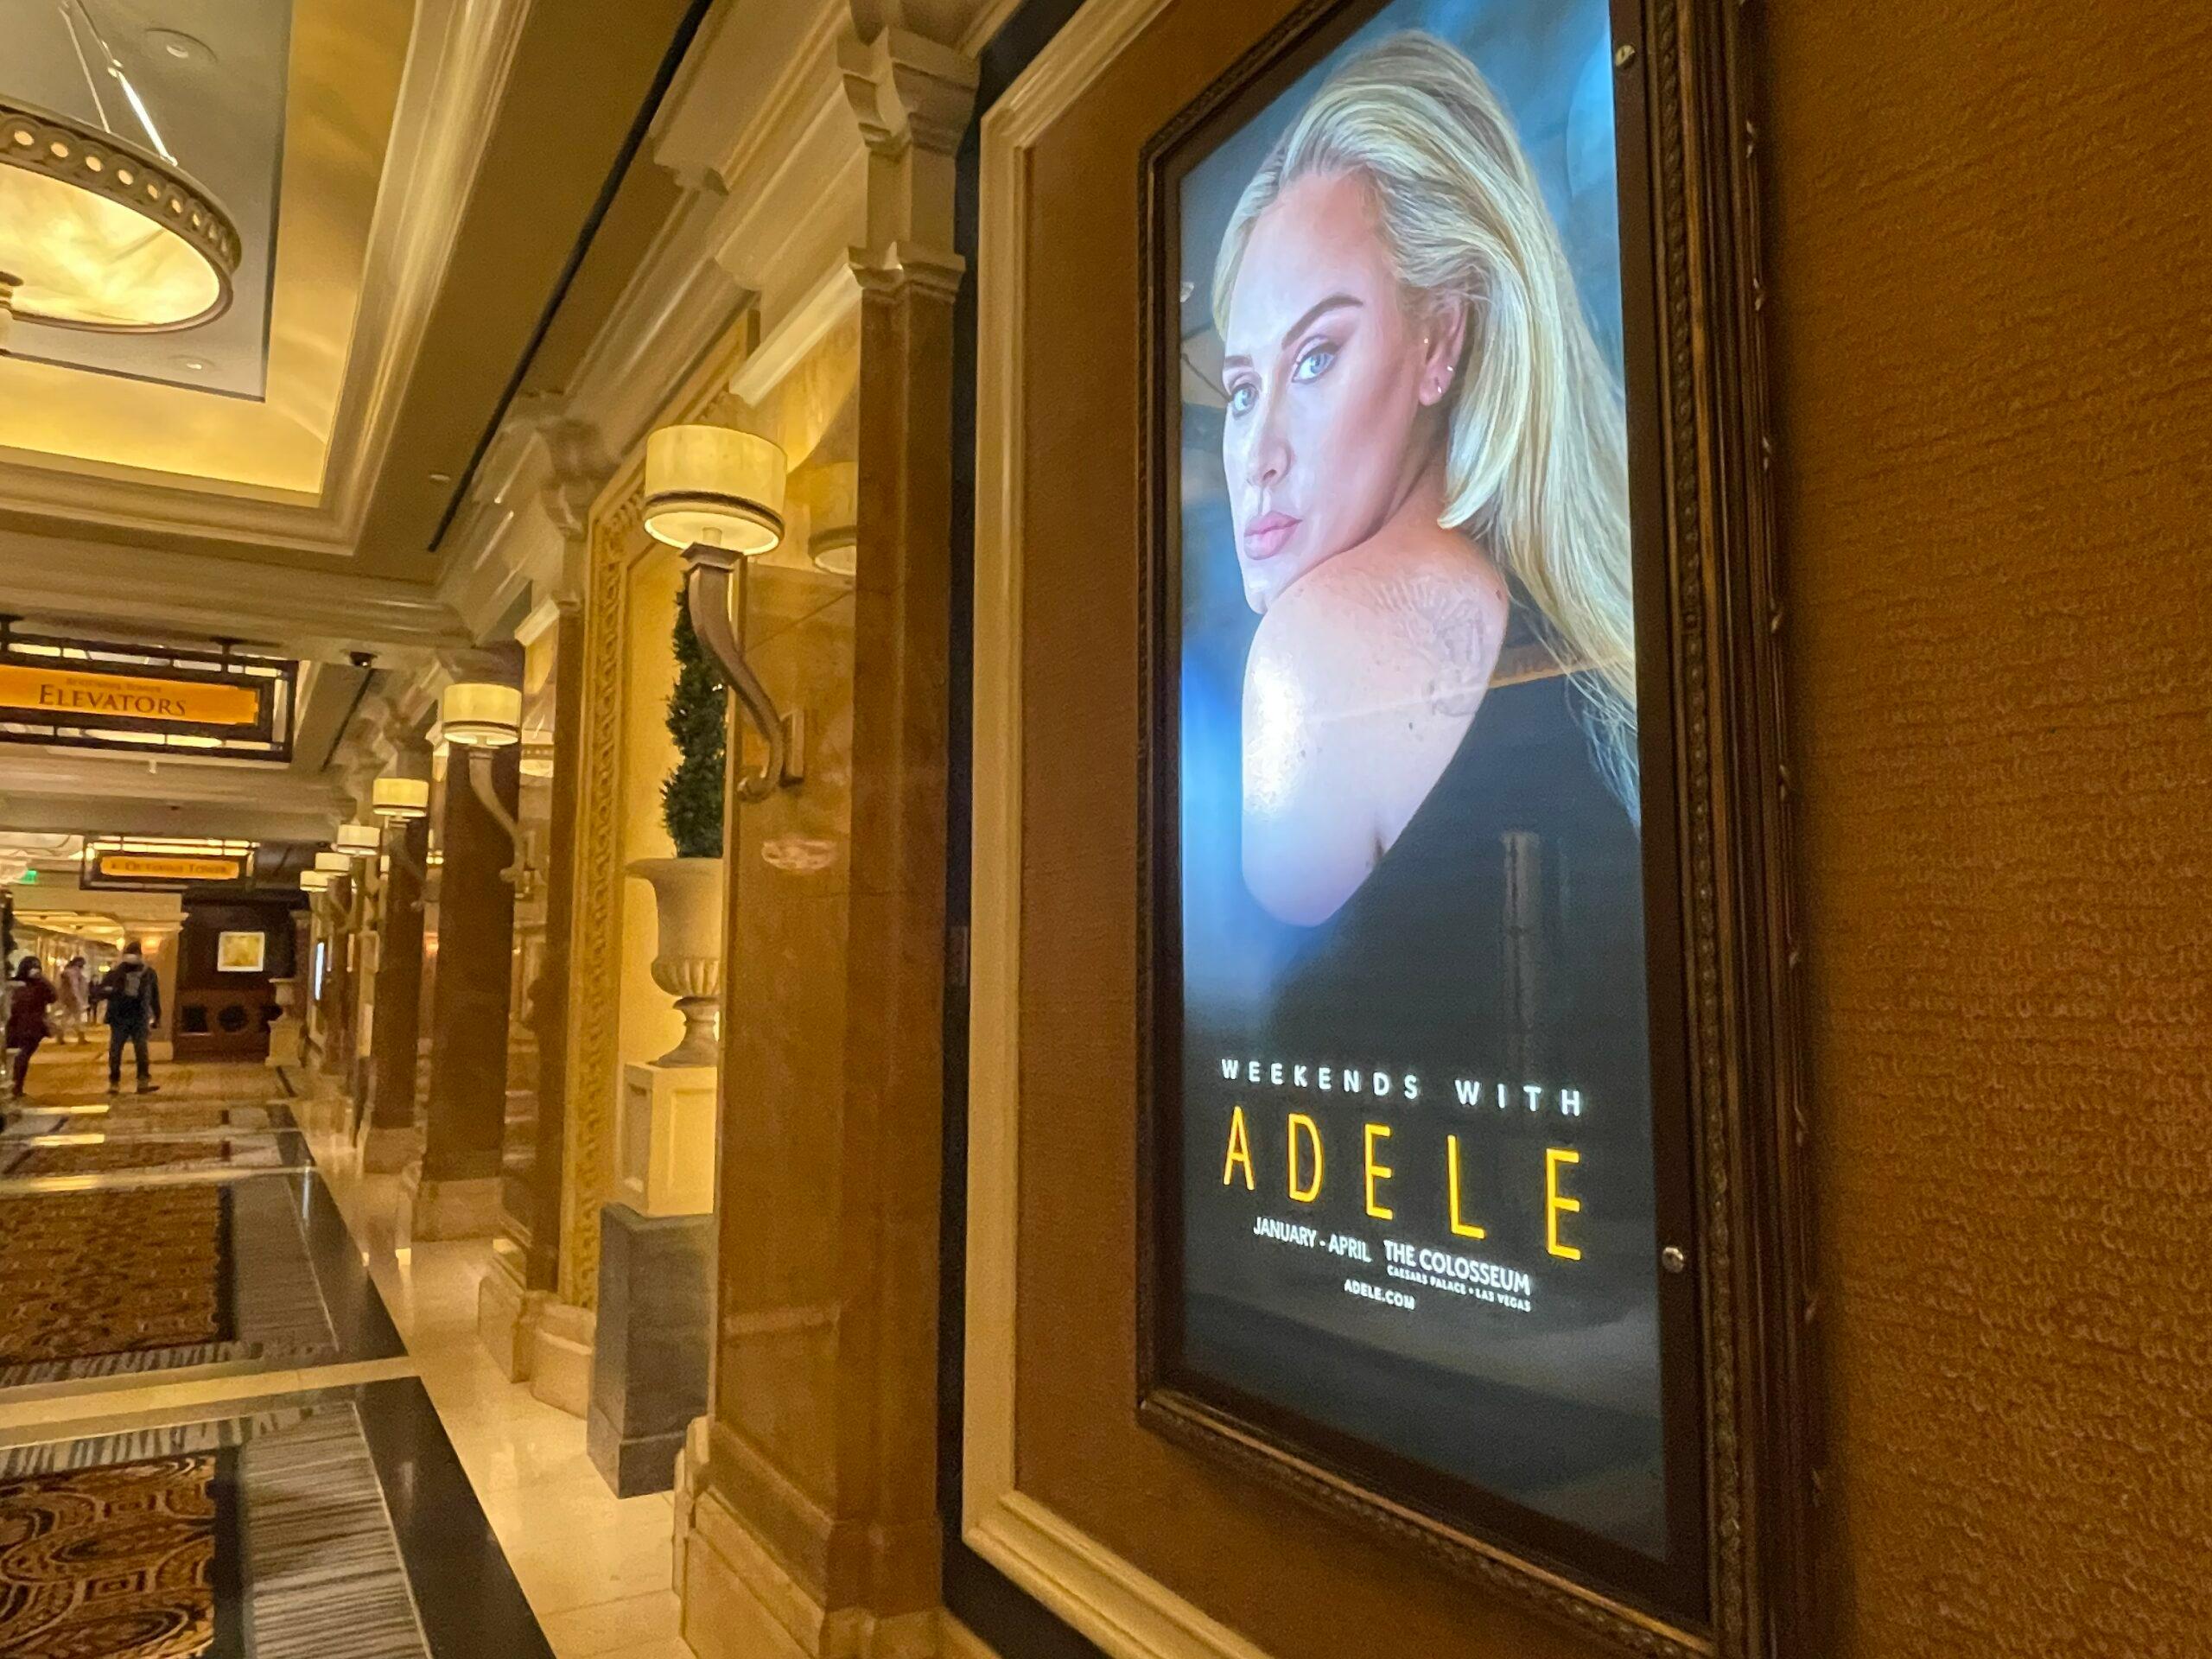 Adele show signage and prep at Colliseum for her 1st opening night week seen in Ceasars Palace in Las Vegas